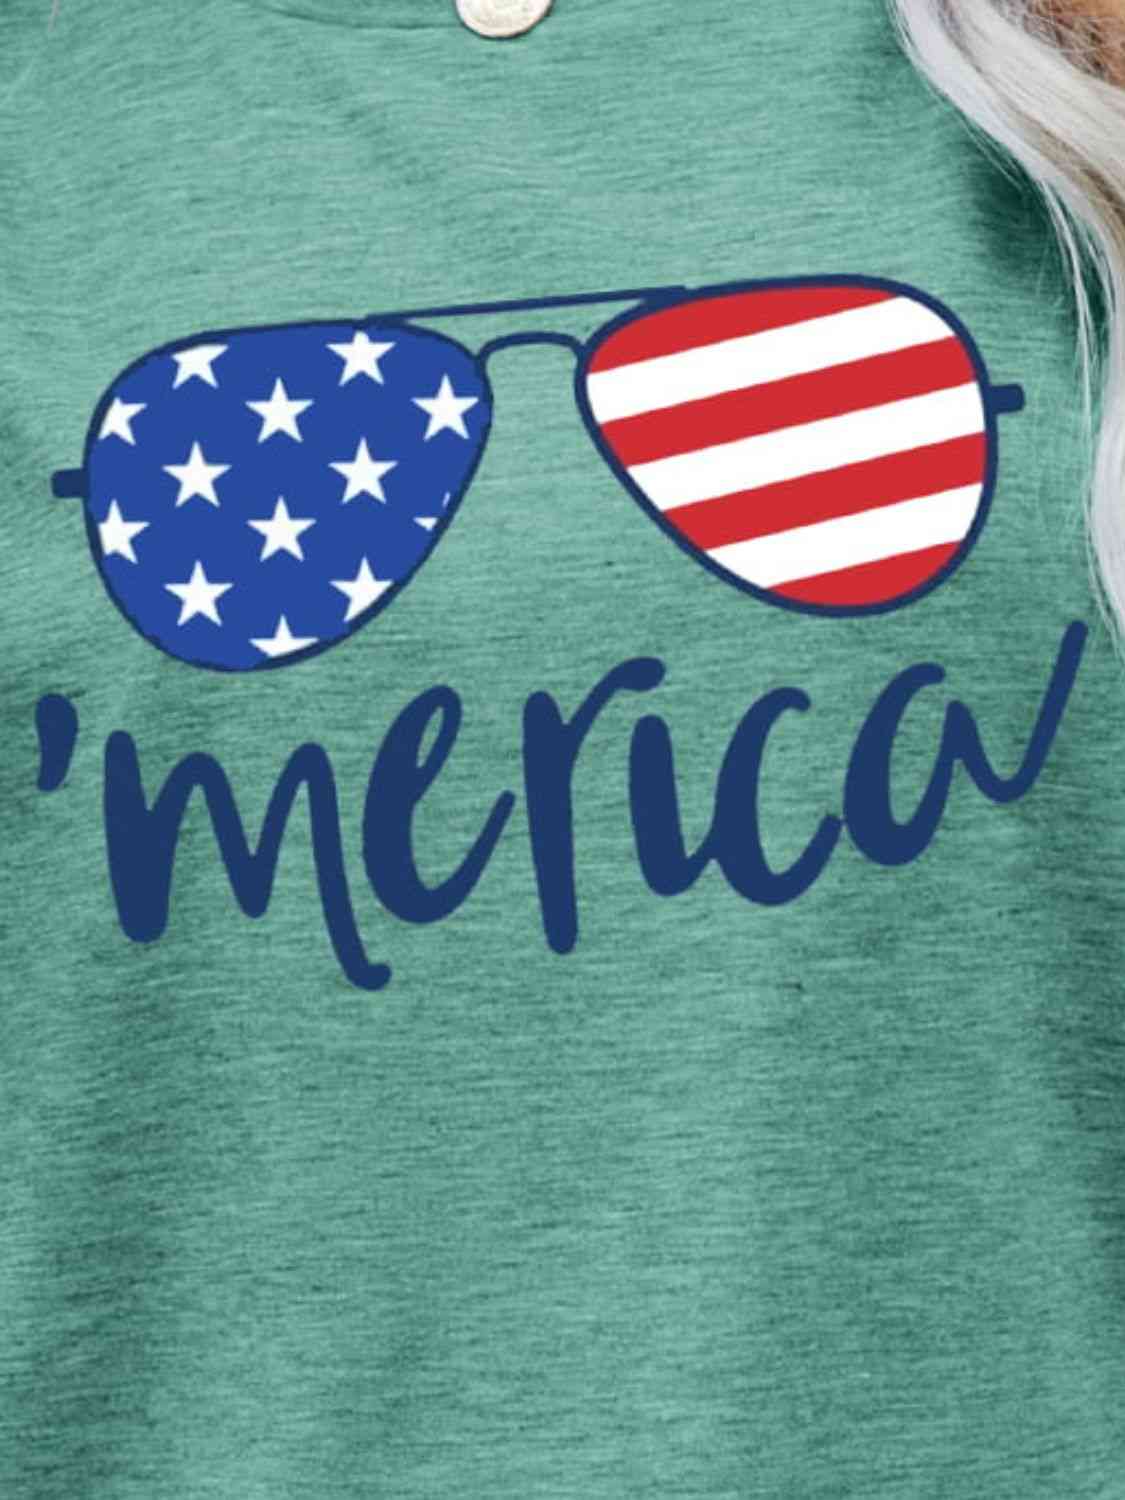 US Flag Glasses Graphic Tee Print on any thing USA/STOD clothes